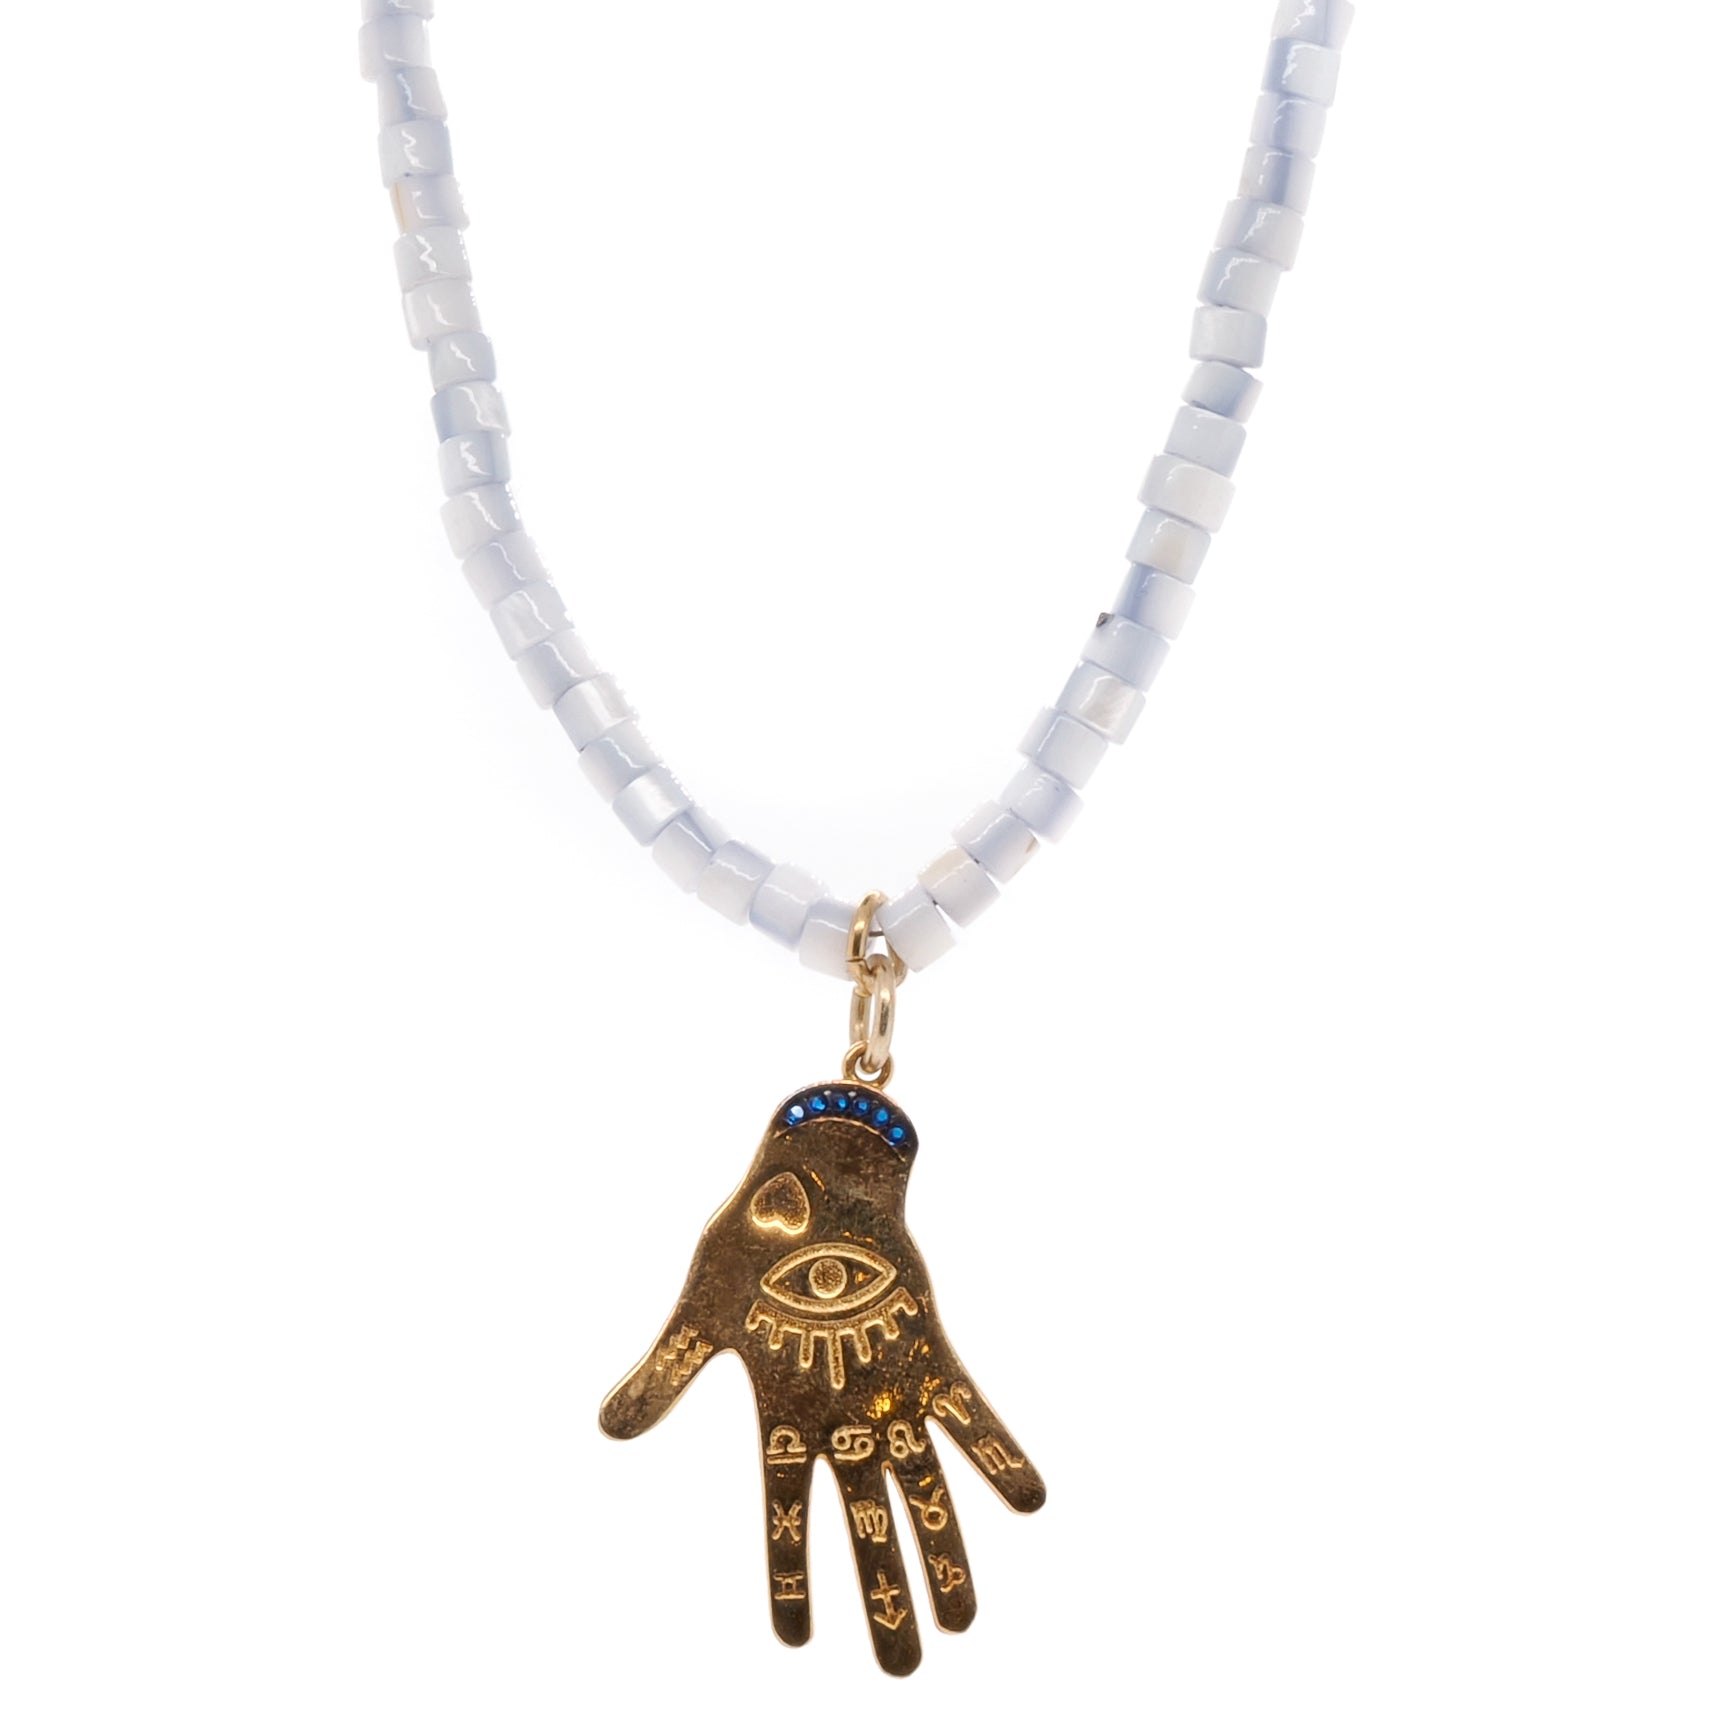 Grounding Necklace is a stunning and meaningful piece of jewelry that combines natural beauty and spiritual meaning.